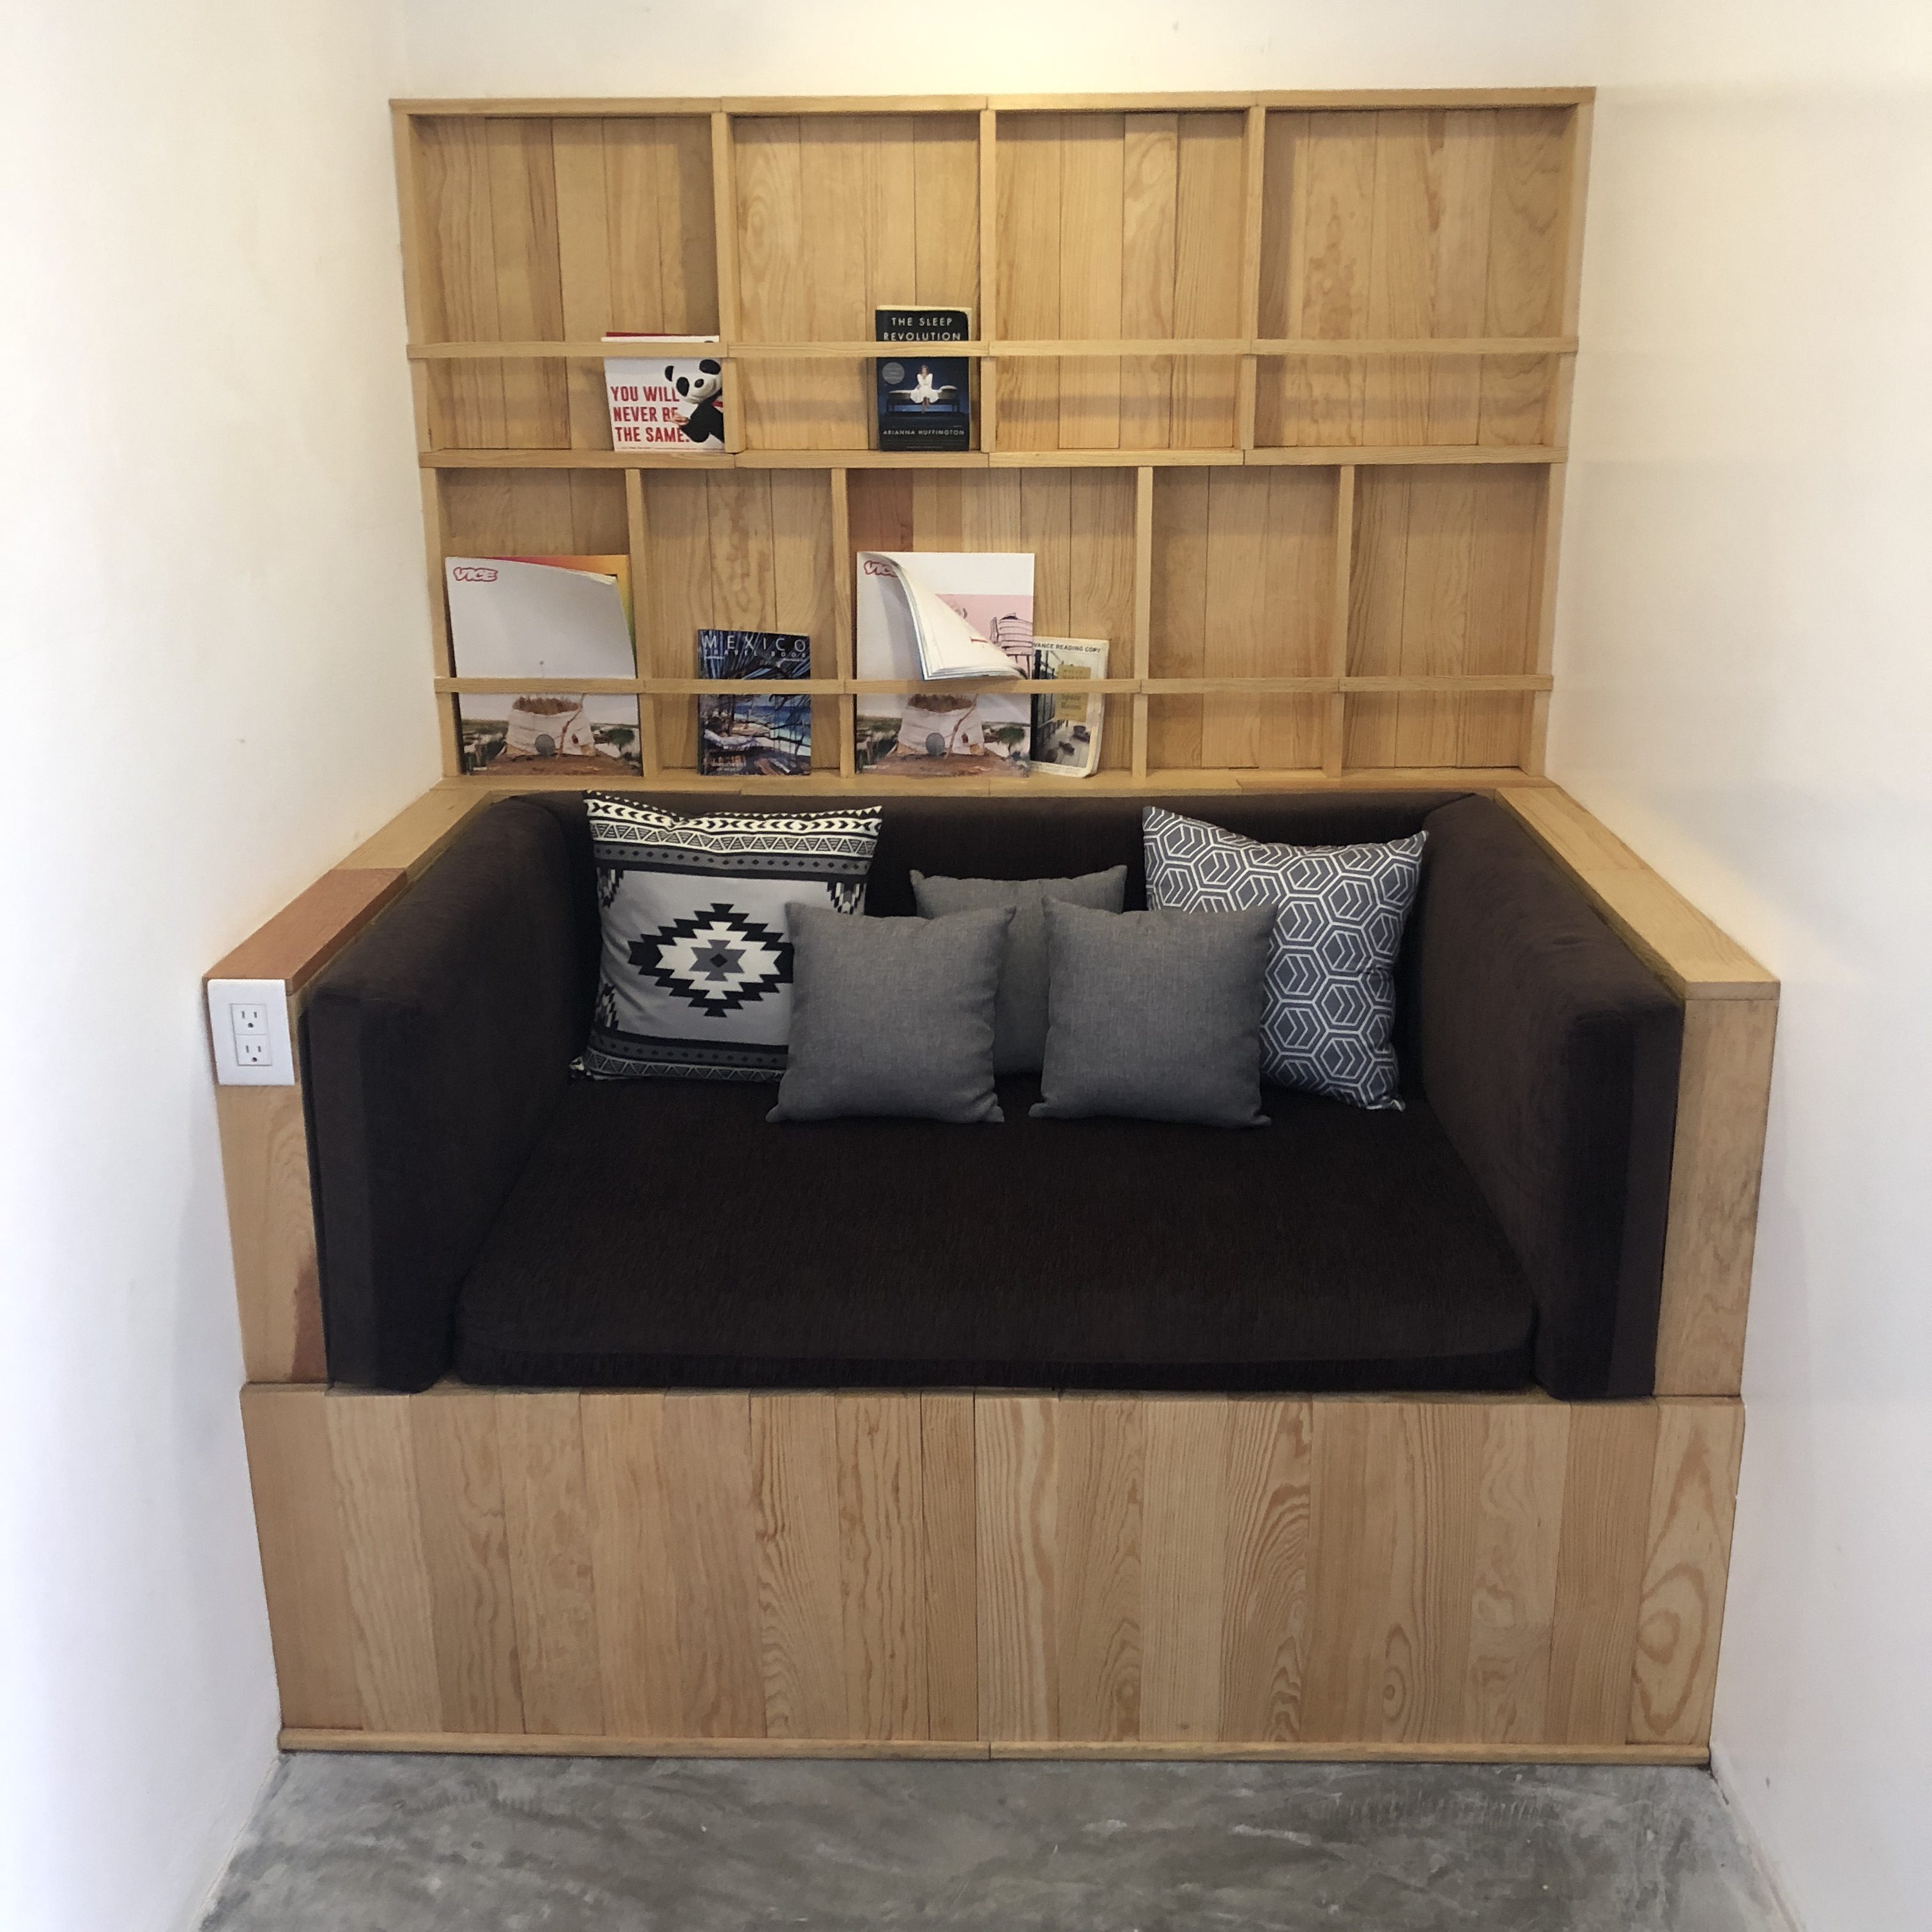 a couch with pillows and a shelf in the corner